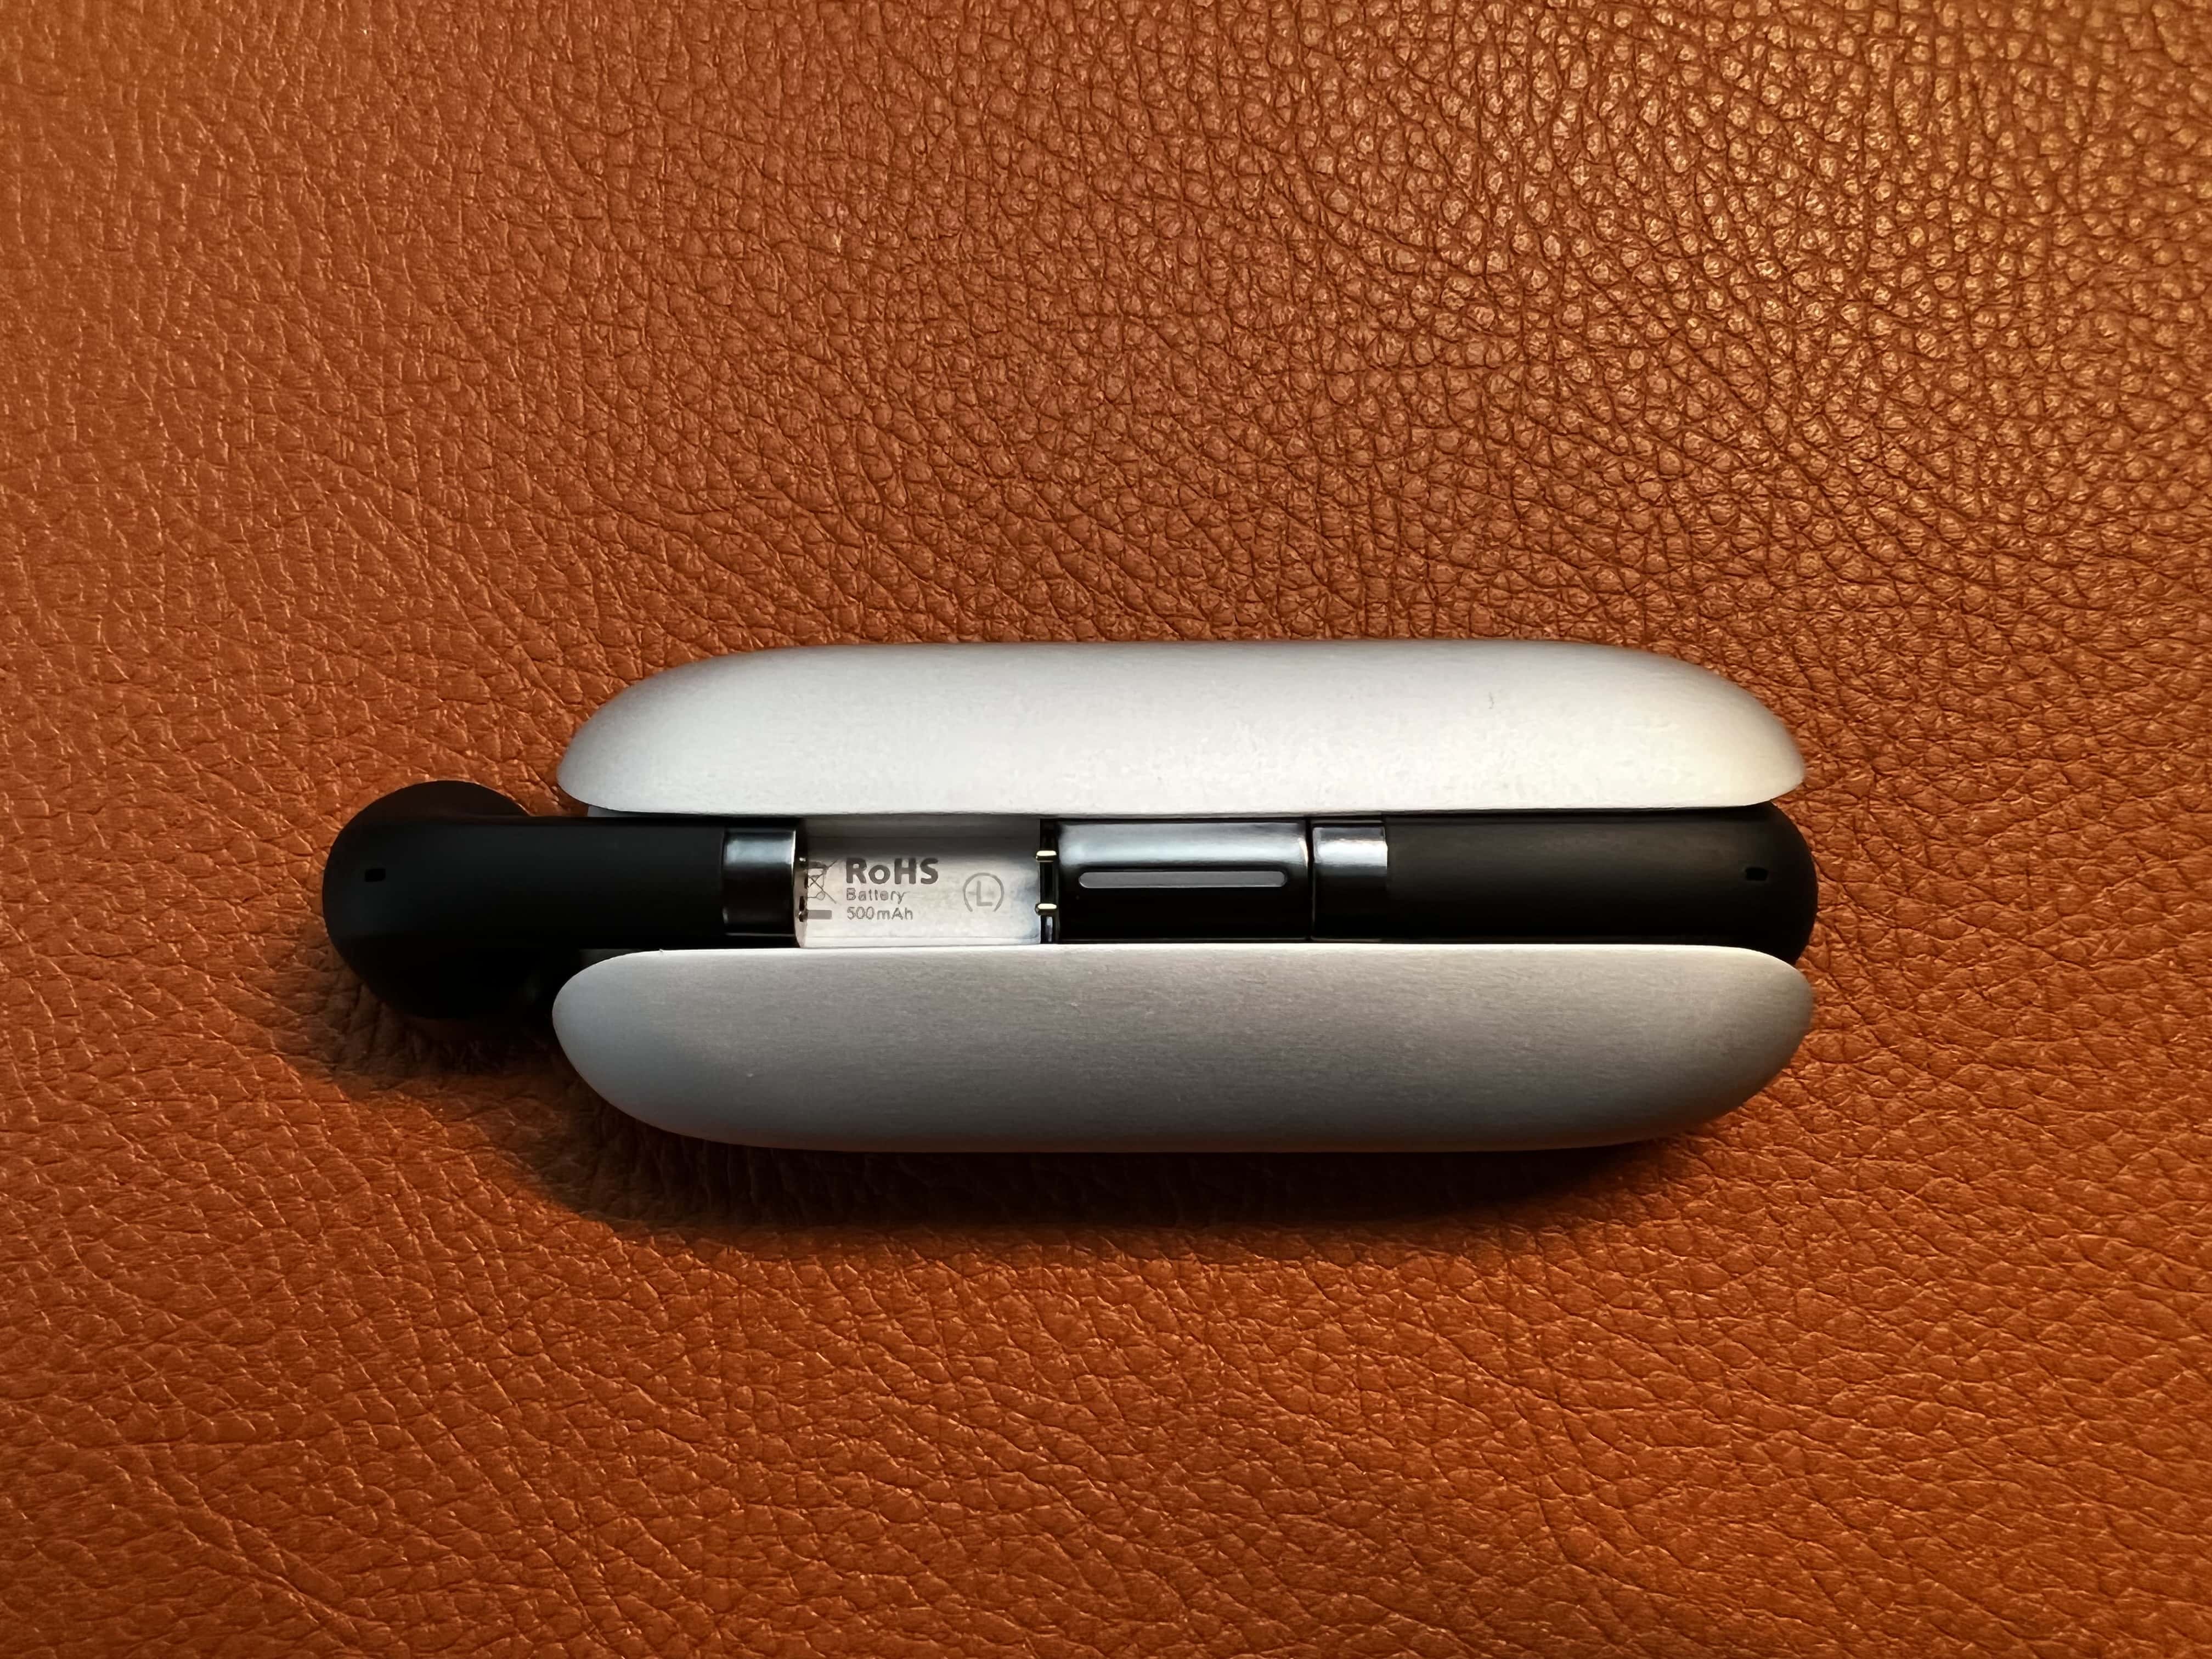 The earbuds slide into magnets on the underside of the case. 